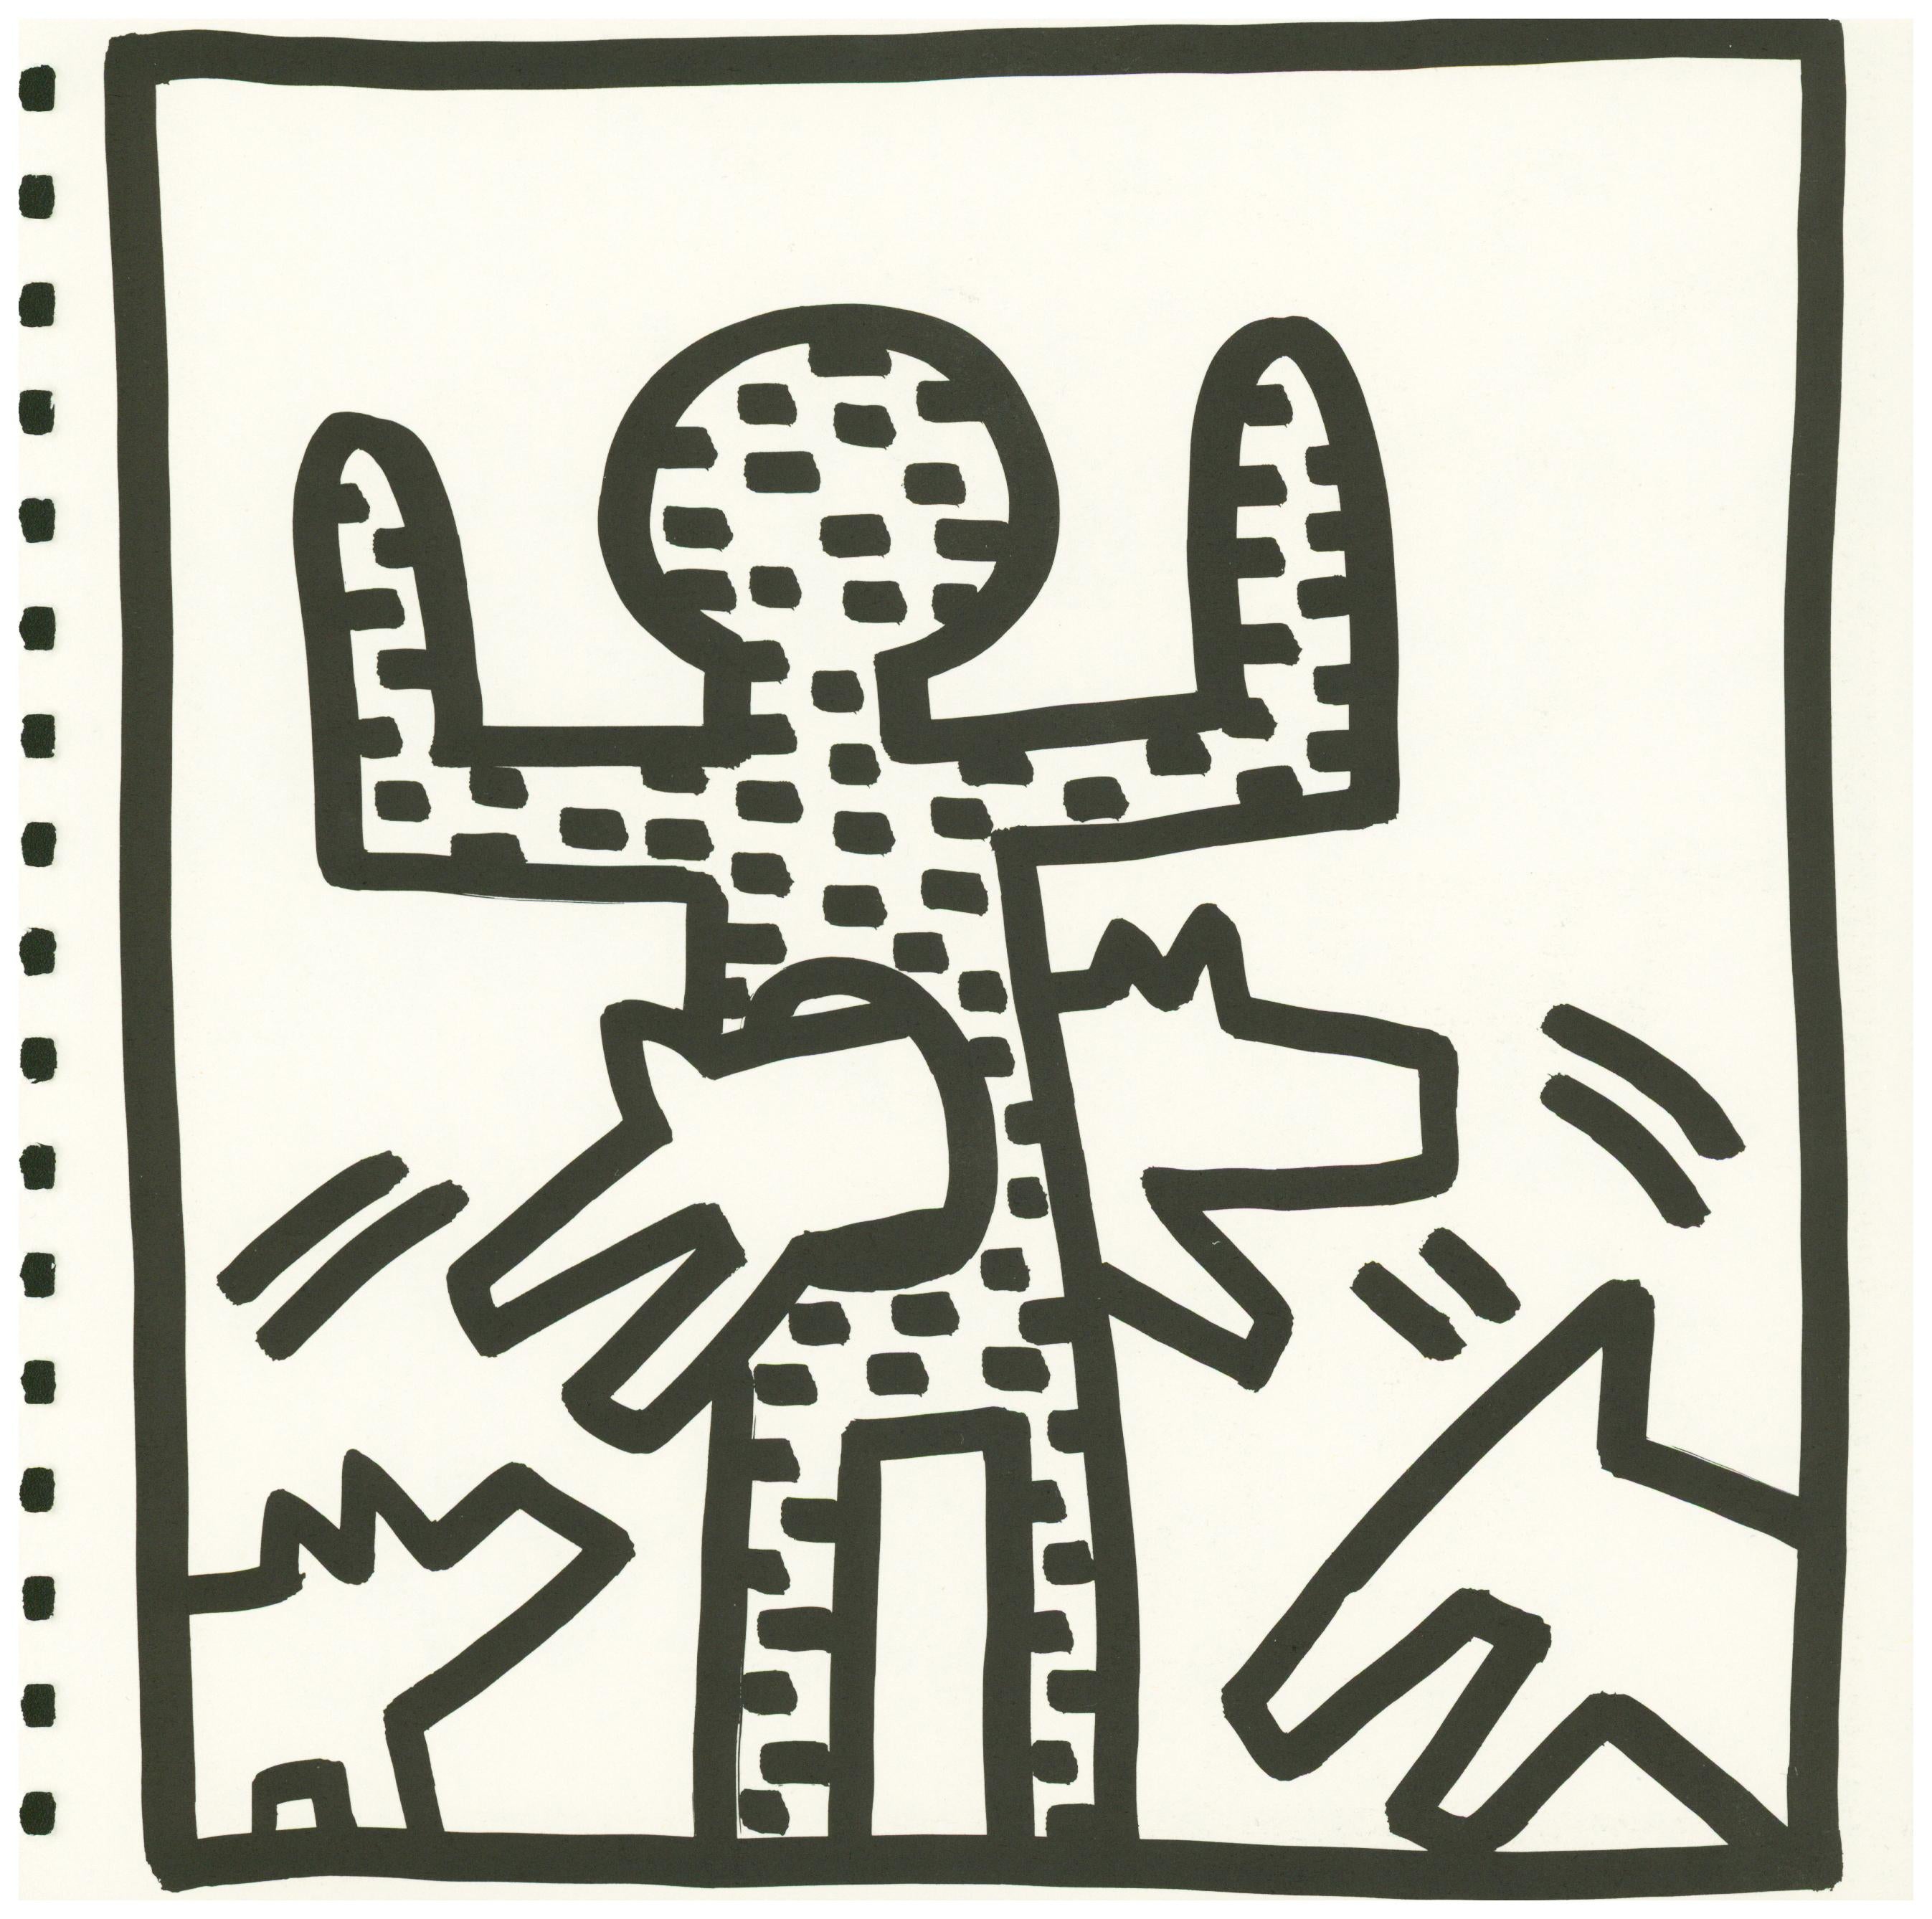 Keith Haring (untitled) angel lithograph 1982 (Keith Haring prints) - Pop Art Print by (after) Keith Haring